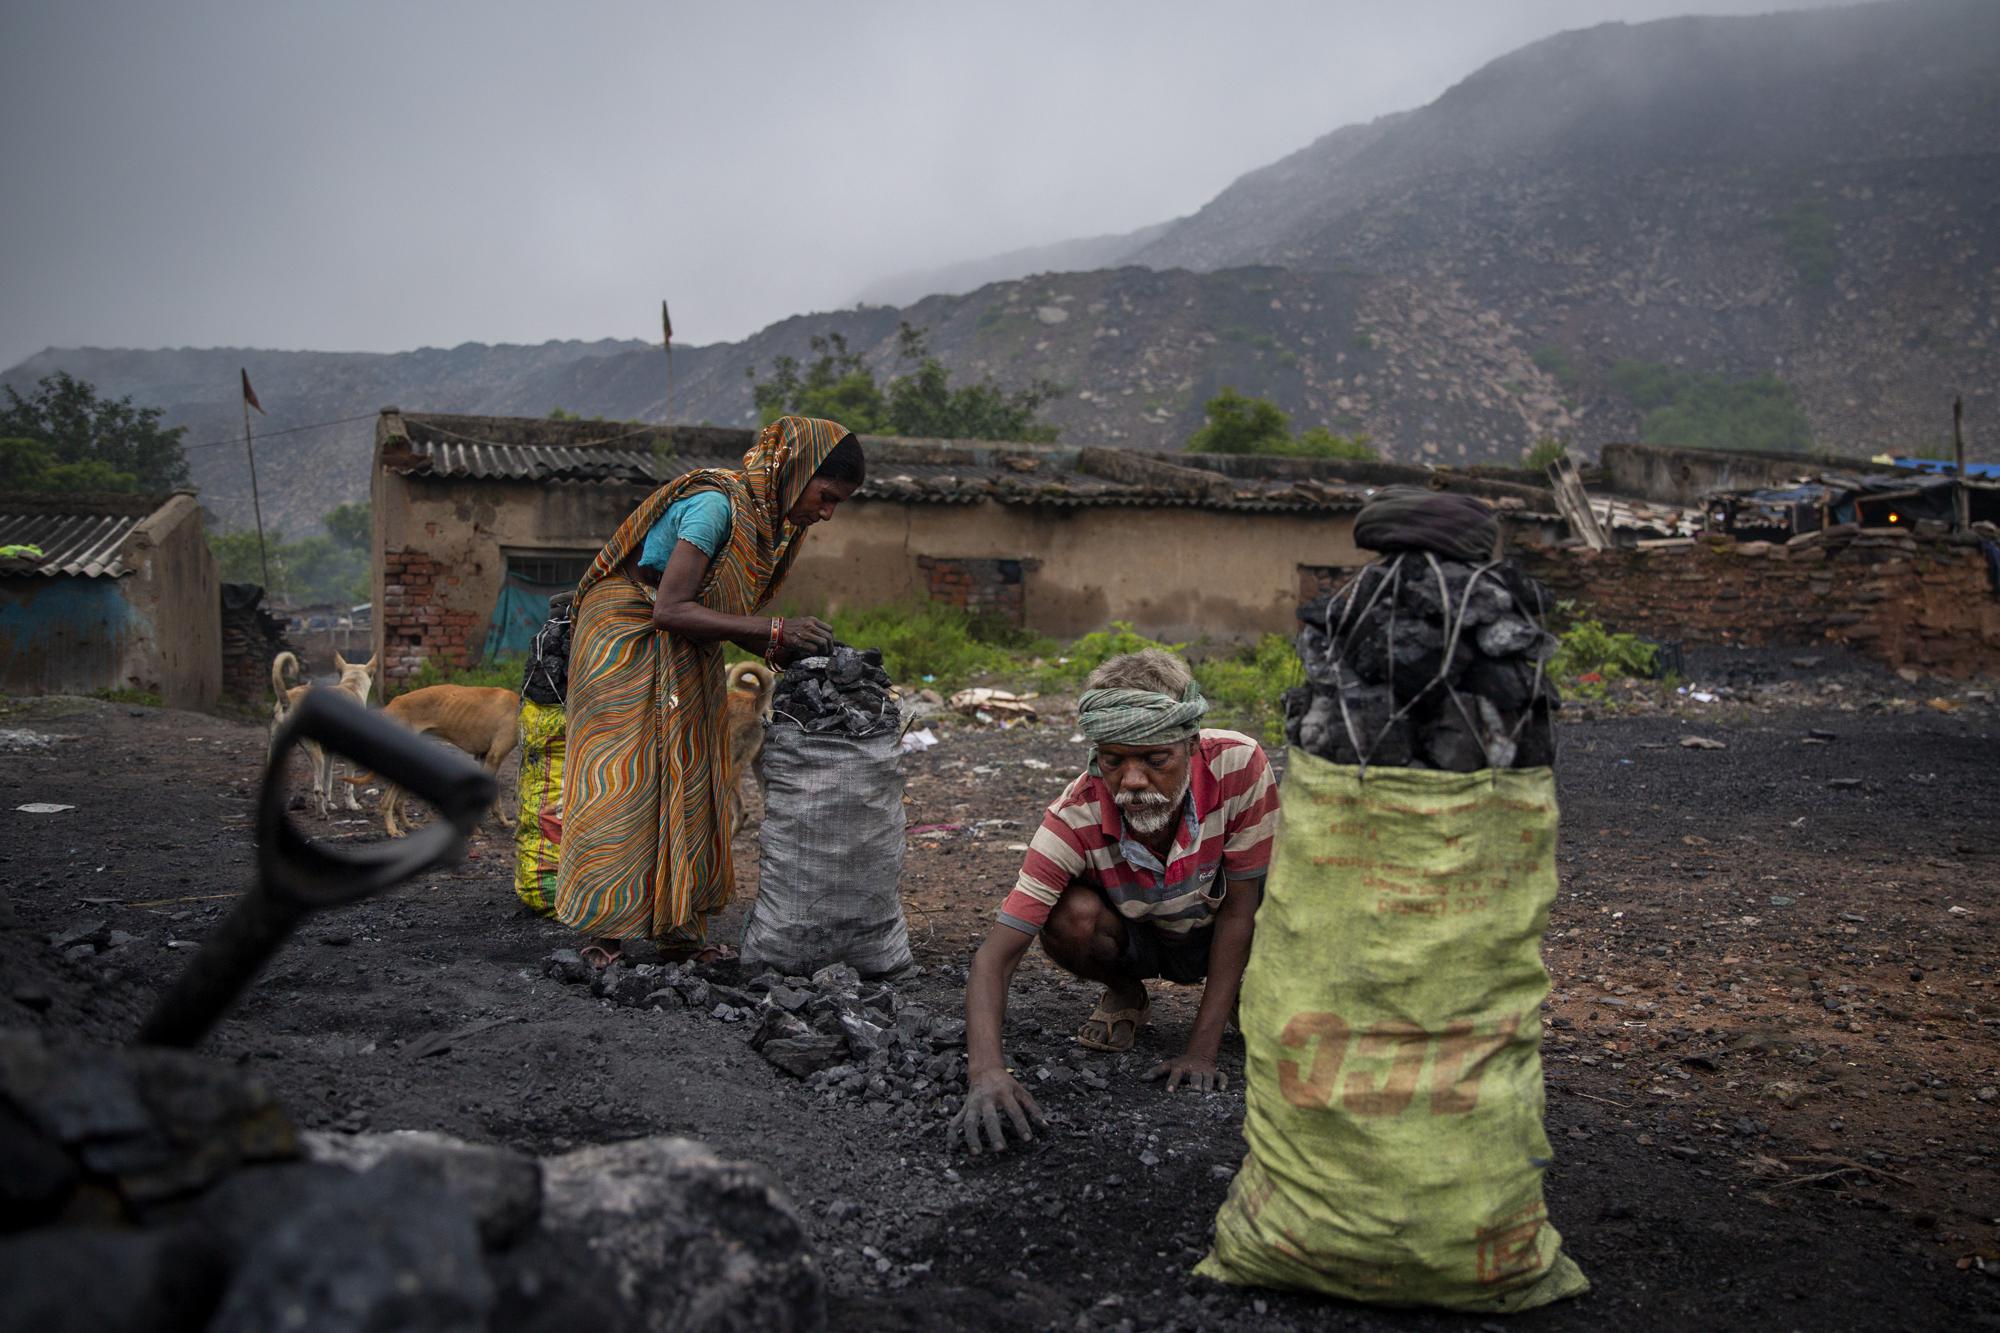 Naresh Chauhan, 50, his wife Rina Devi, 45 fill sacks with coal in Dhanbad, an eastern Indian city in Jharkhand state, Friday, Sept. 24, 2021. The two have lived in a village at the edge of the Jharia coalfield in Dhanbad all their lives. The couple earn $3 a day selling four baskets of scavenged coal to traders. For people like Chauhan and Devi, India’s economic slowdown resulting from the pandemic has intensified their dependence on coal. (AP Photo/Altaf Qadri)